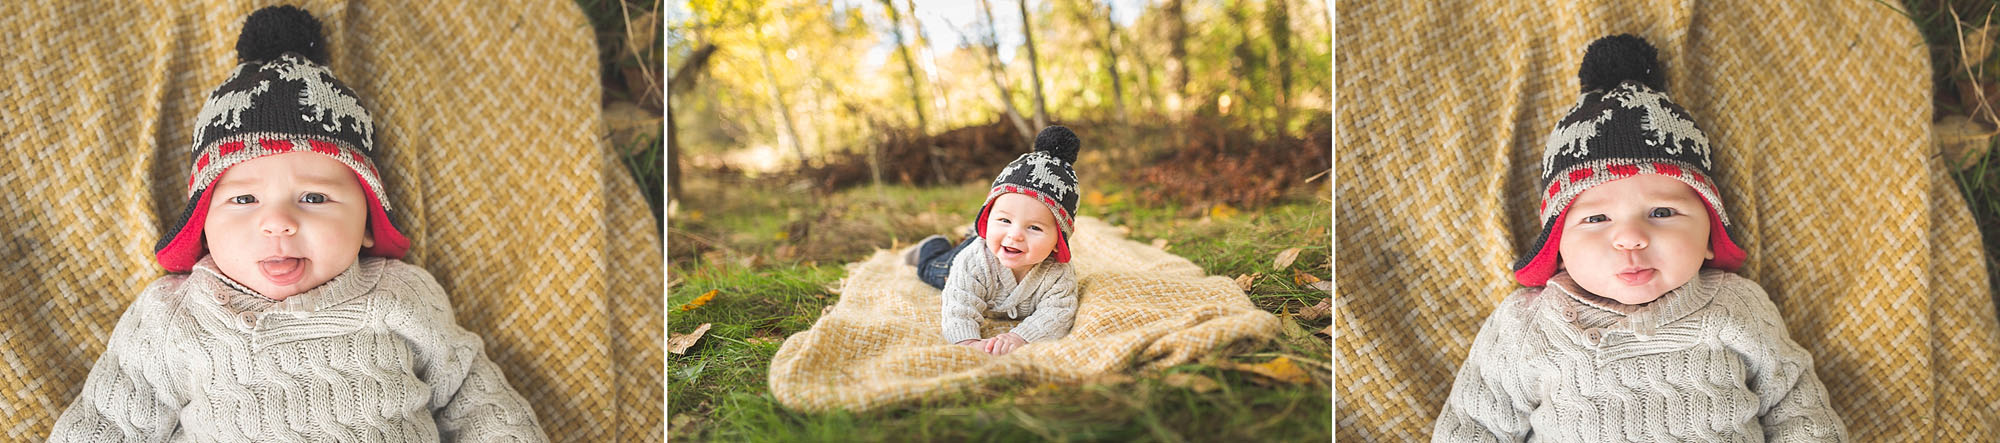 ashley vos photography seattle area lifestyle family and birth photography_0102.jpg